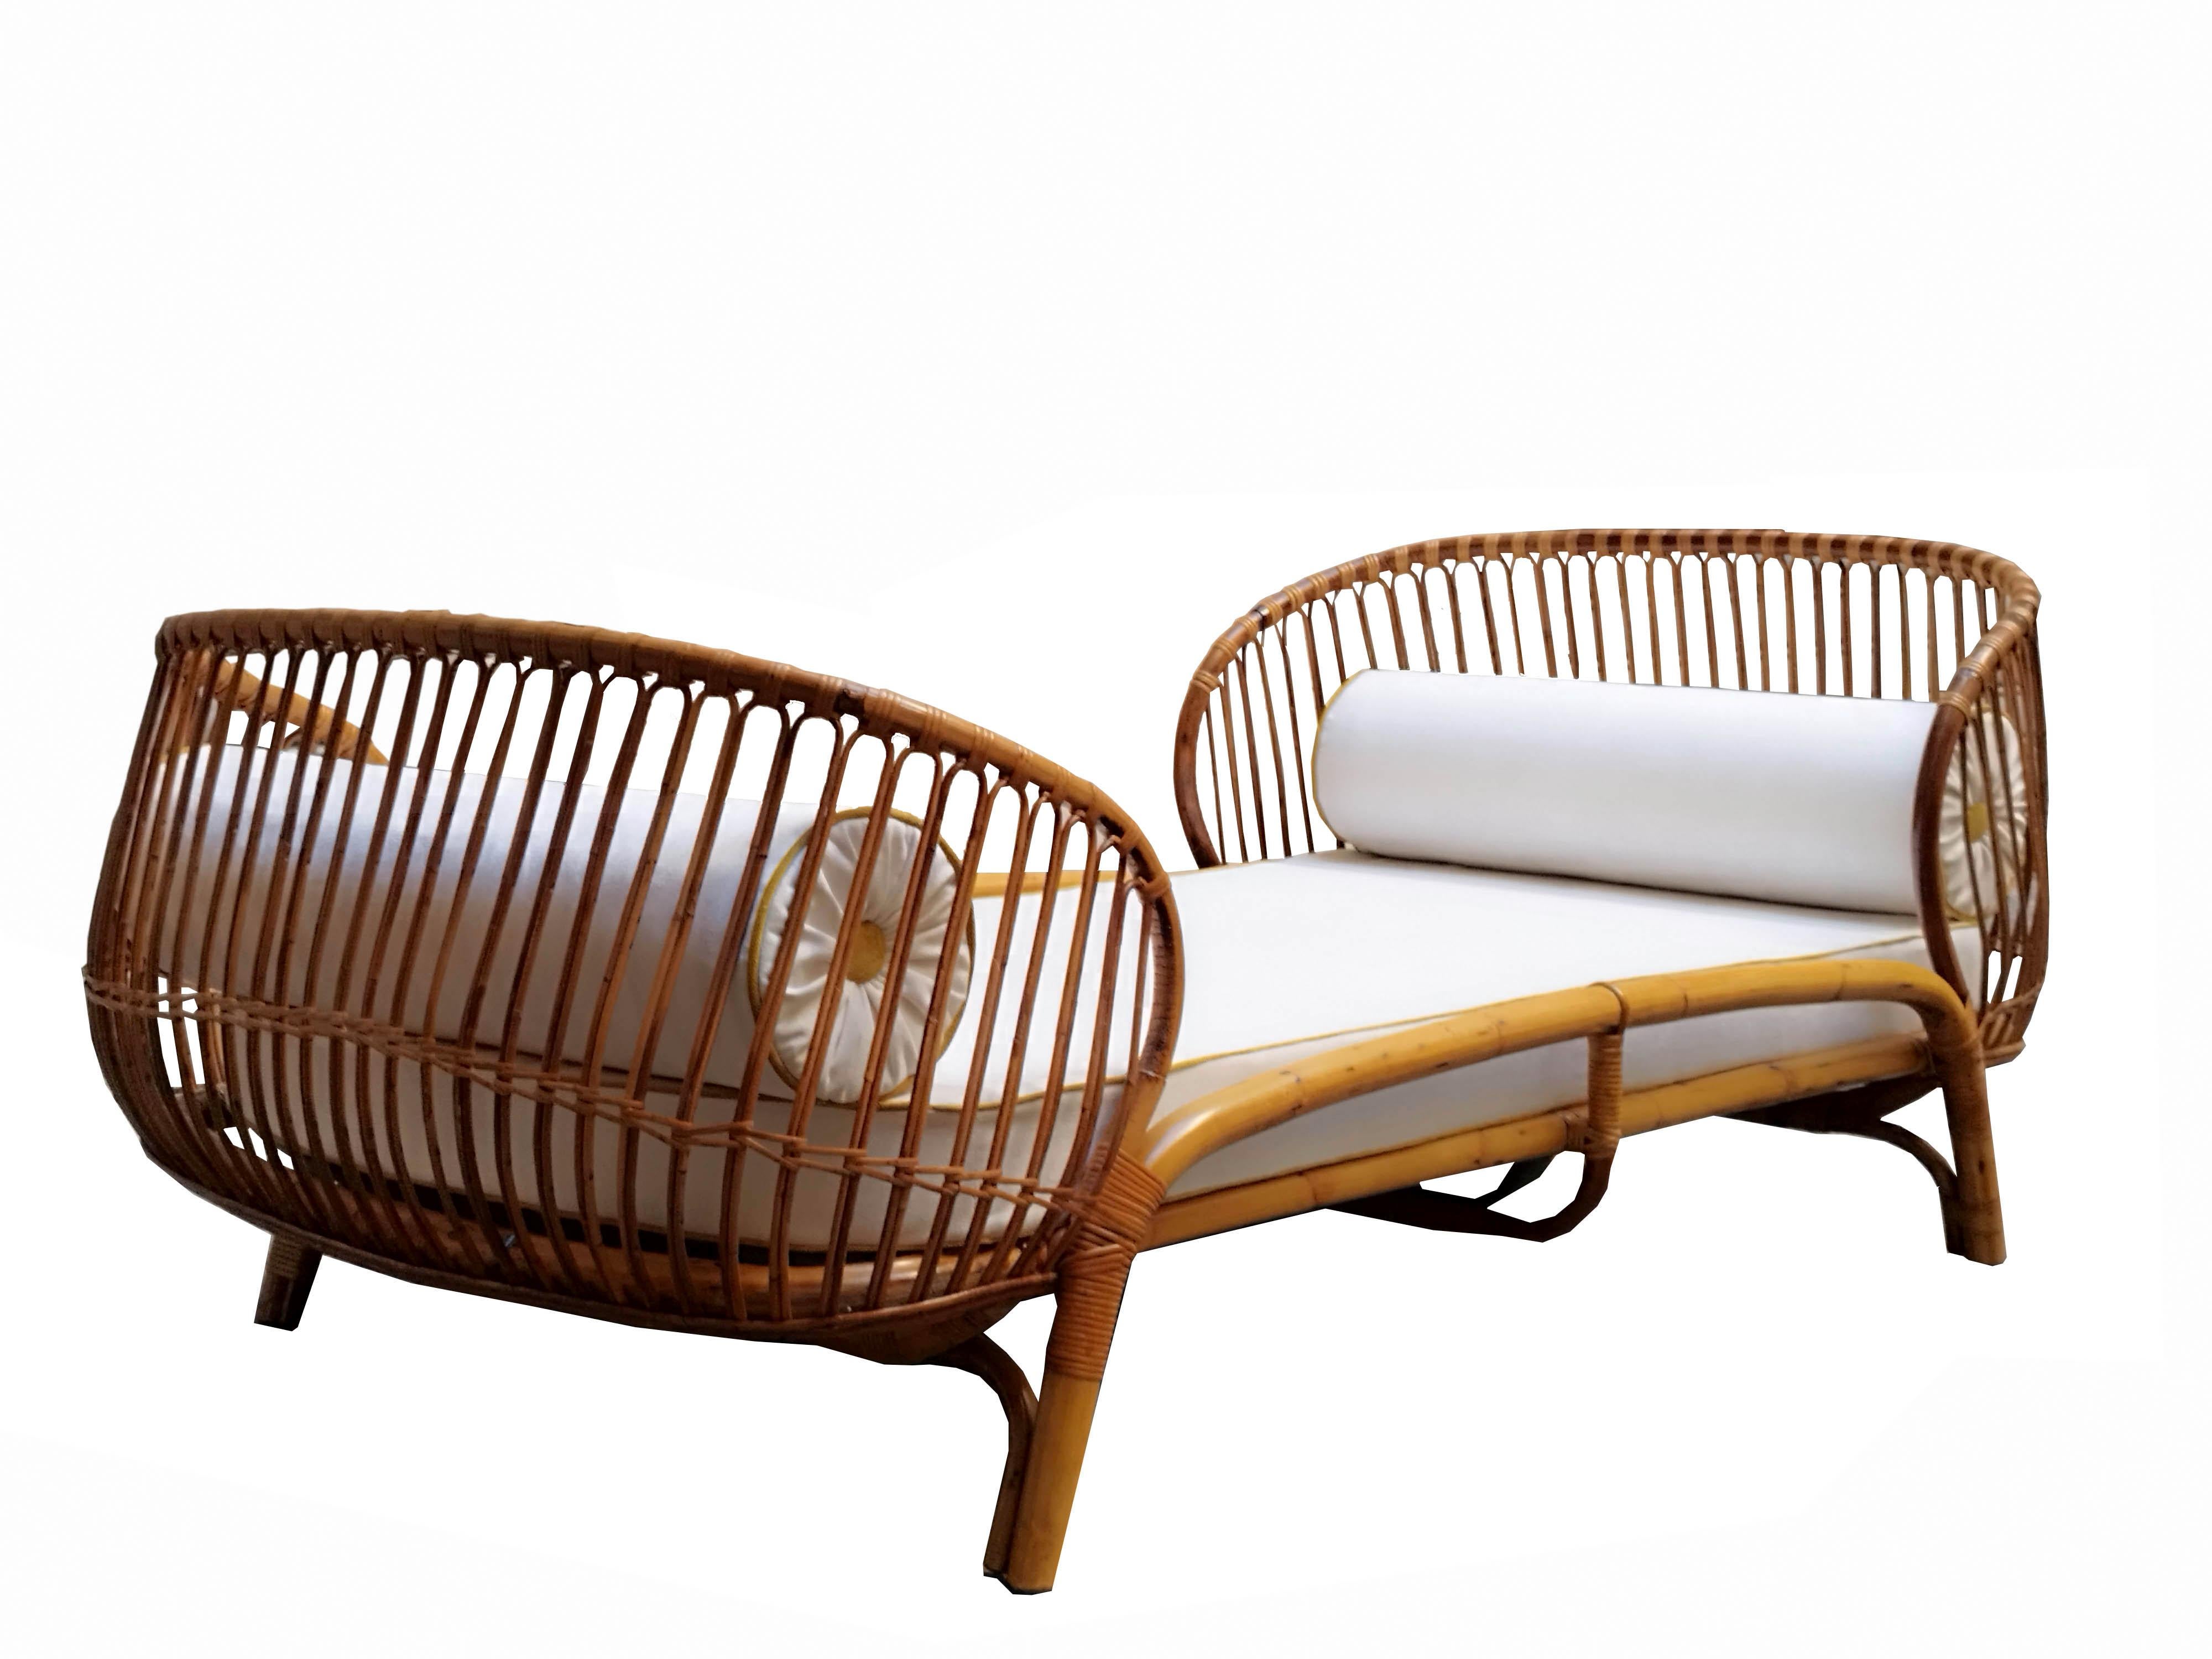 A splendid curved bamboo daybed designed by Franca Helg for Bonacina in the 1960s. The bed is made entirely of a bamboo frame, rattan and rush joints.